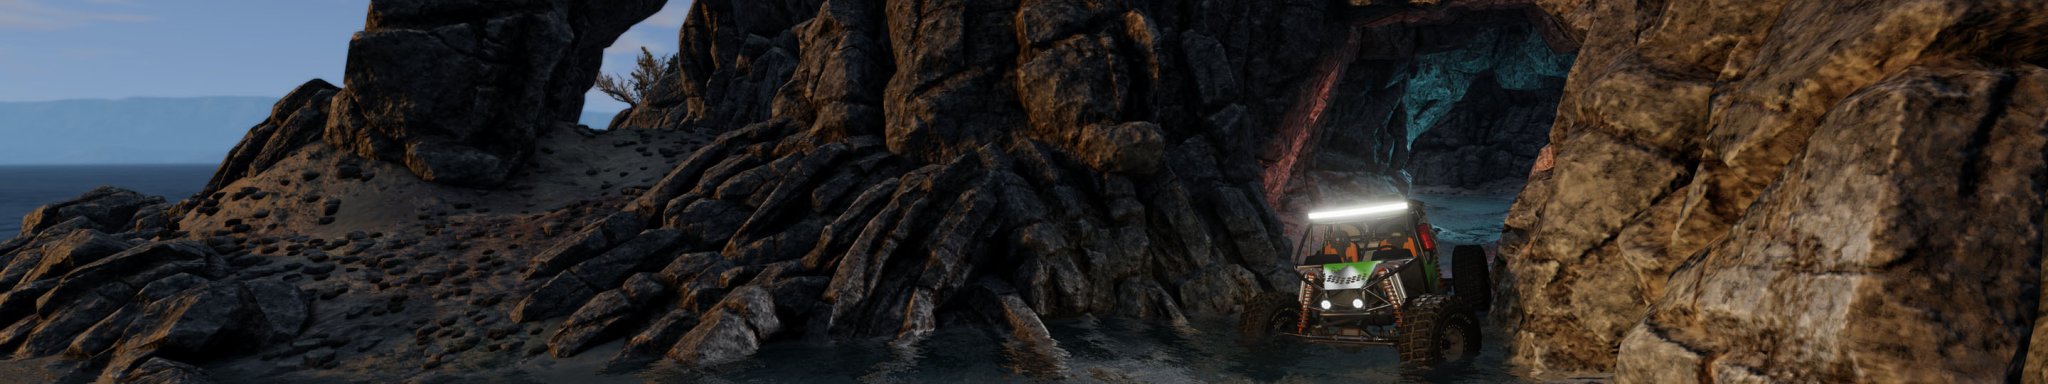 000a BeamNG ROCK BOUNCER at SMALL ISLAND CAVE copy.jpg